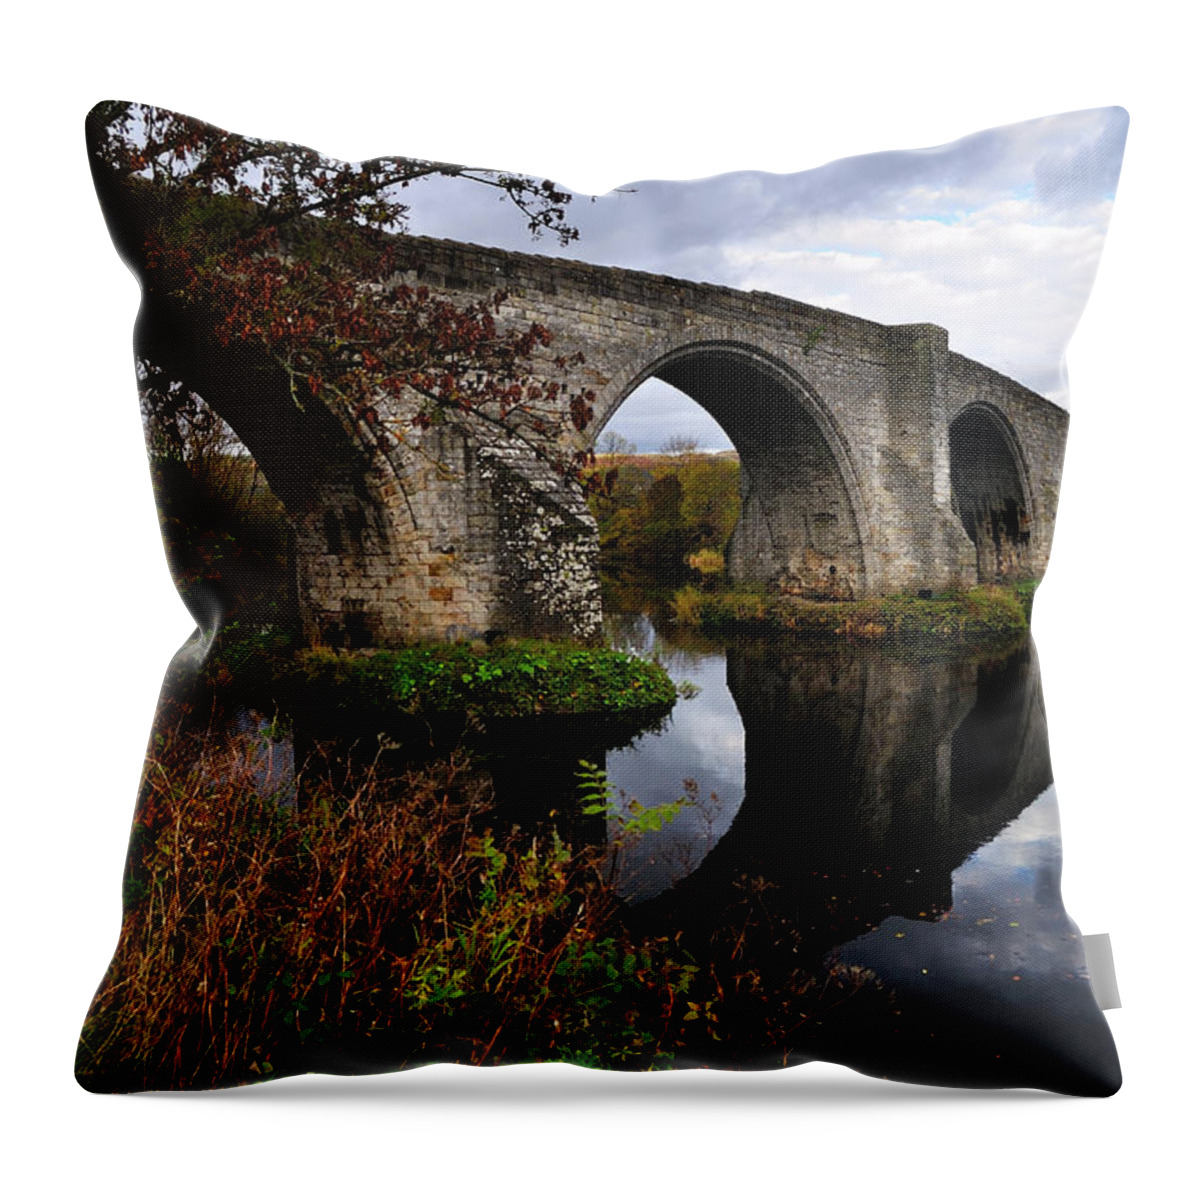 Tranquility Throw Pillow featuring the photograph Stirling Old Bridge, Scotland In Autumn by John Lawson, Belhaven